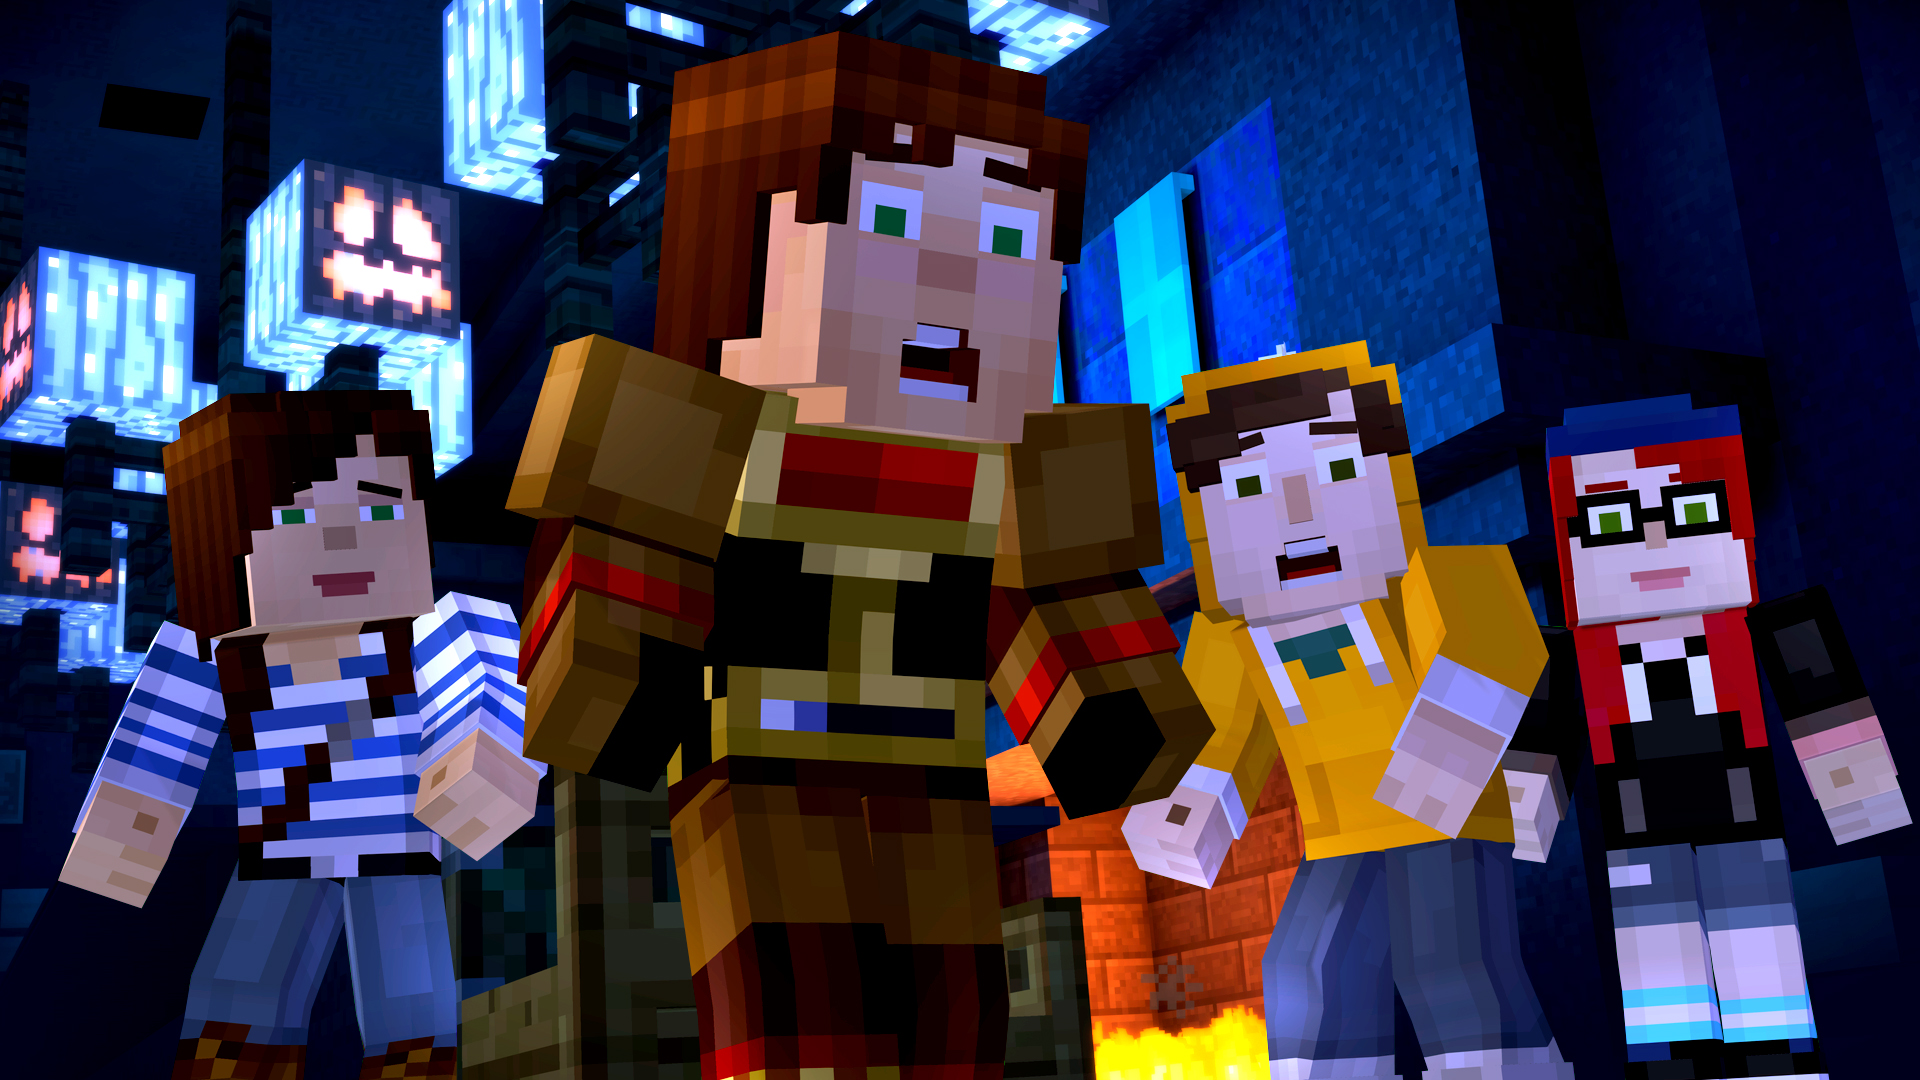 Minecraft Story Mode Full APK Android Game Free Download